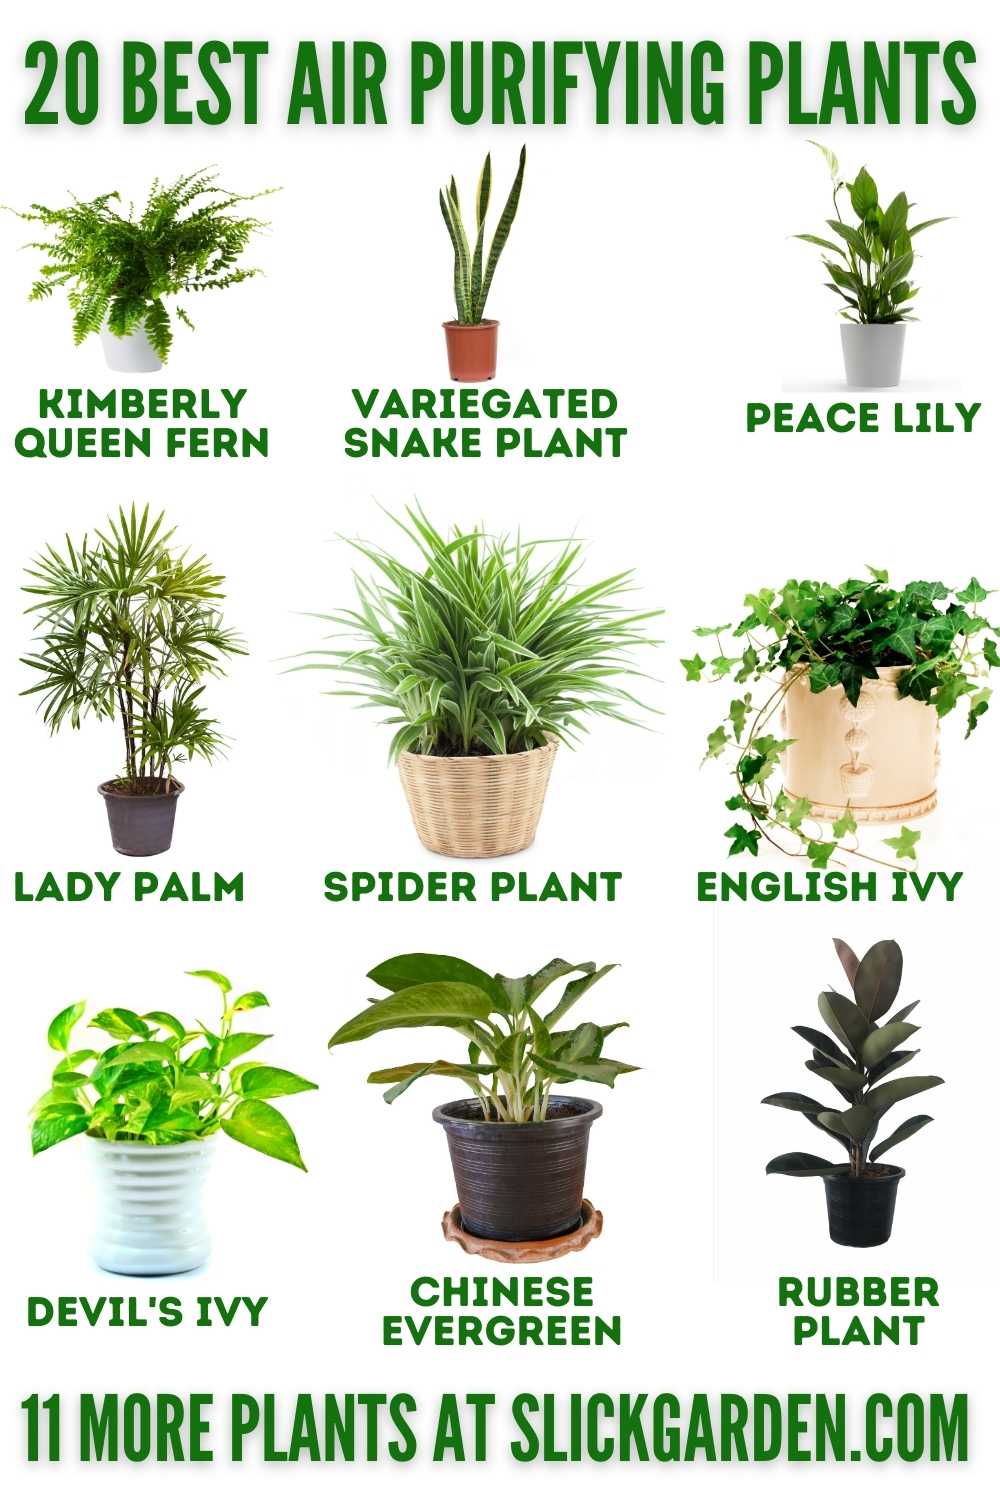 20 BEST AIR PURIFYING PLANTS 